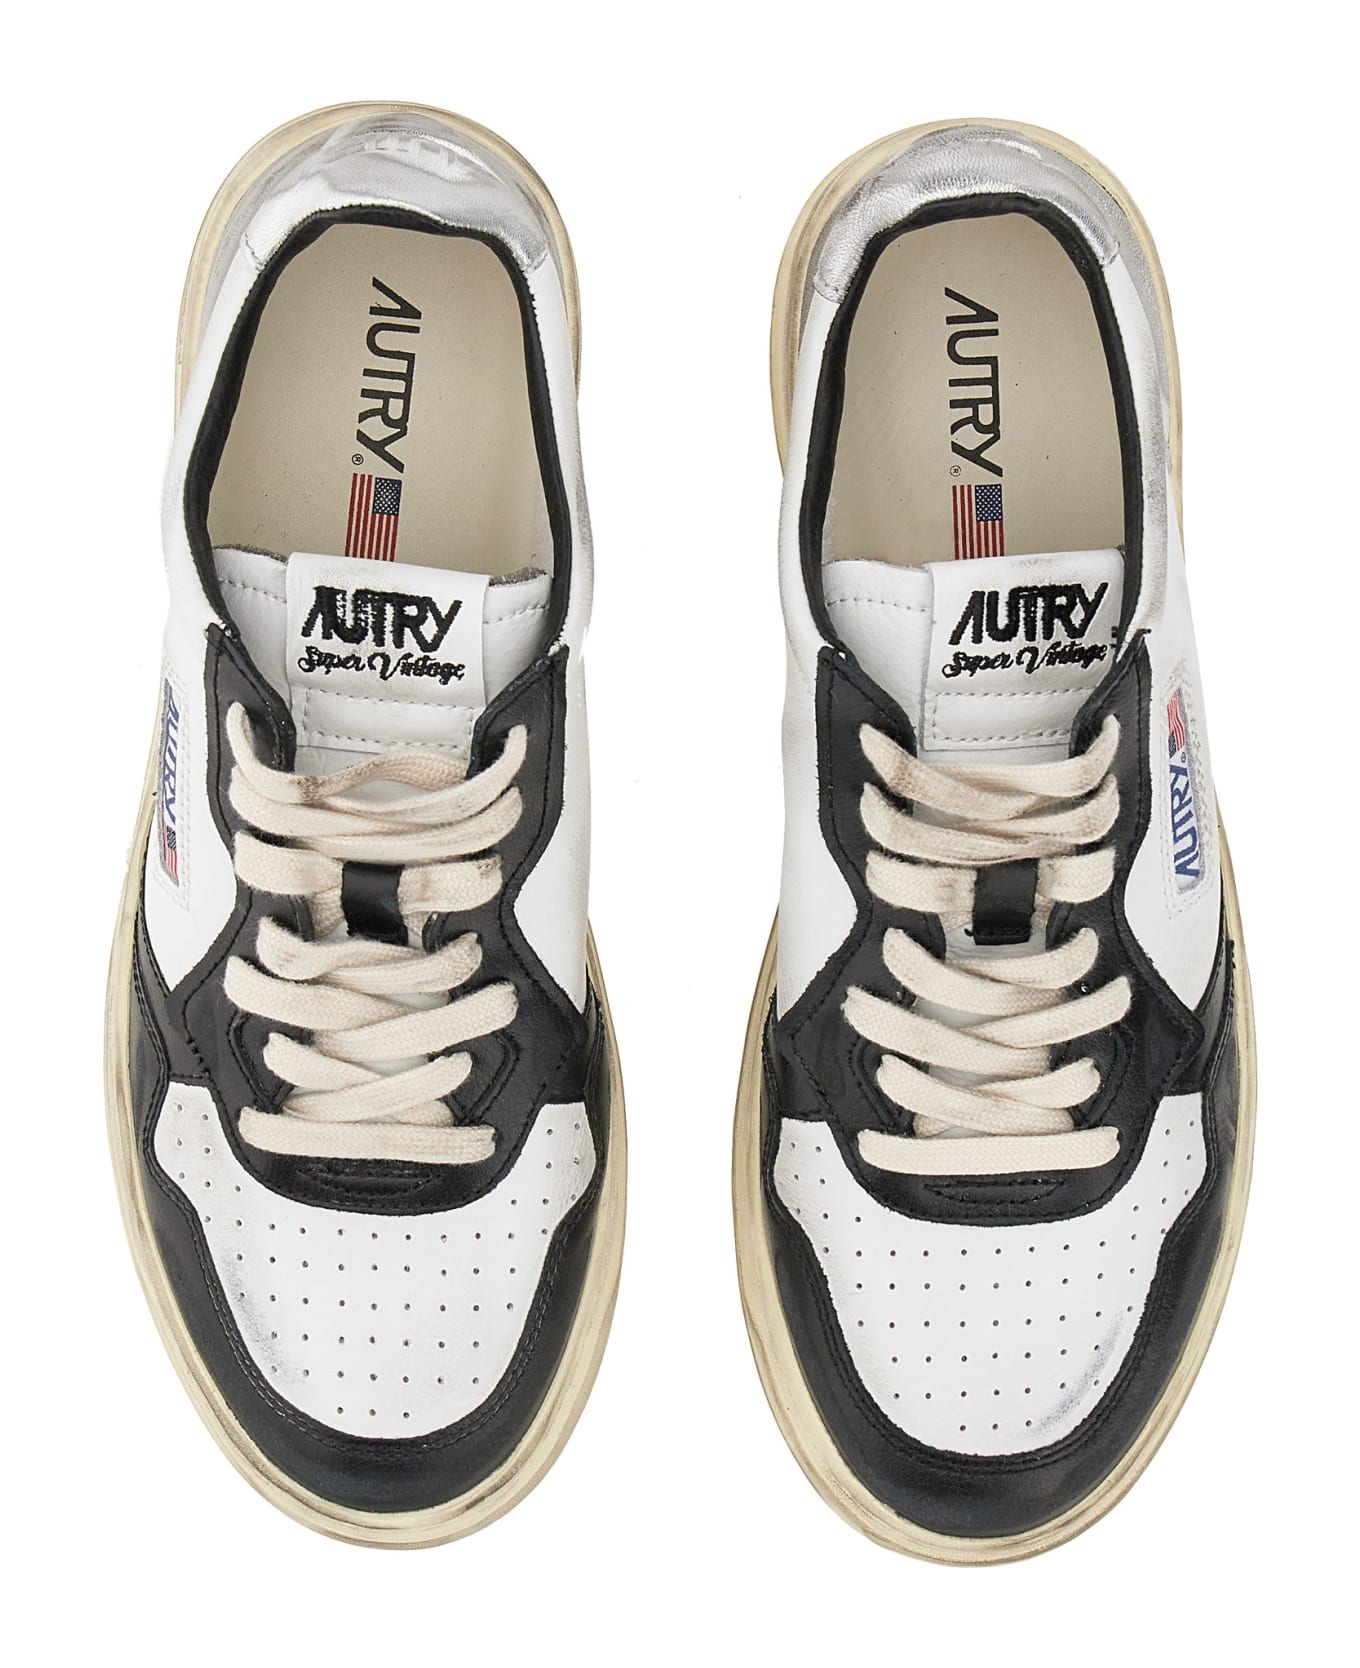 Autry Super Vintage Low Sneakers - Bianco スニーカー